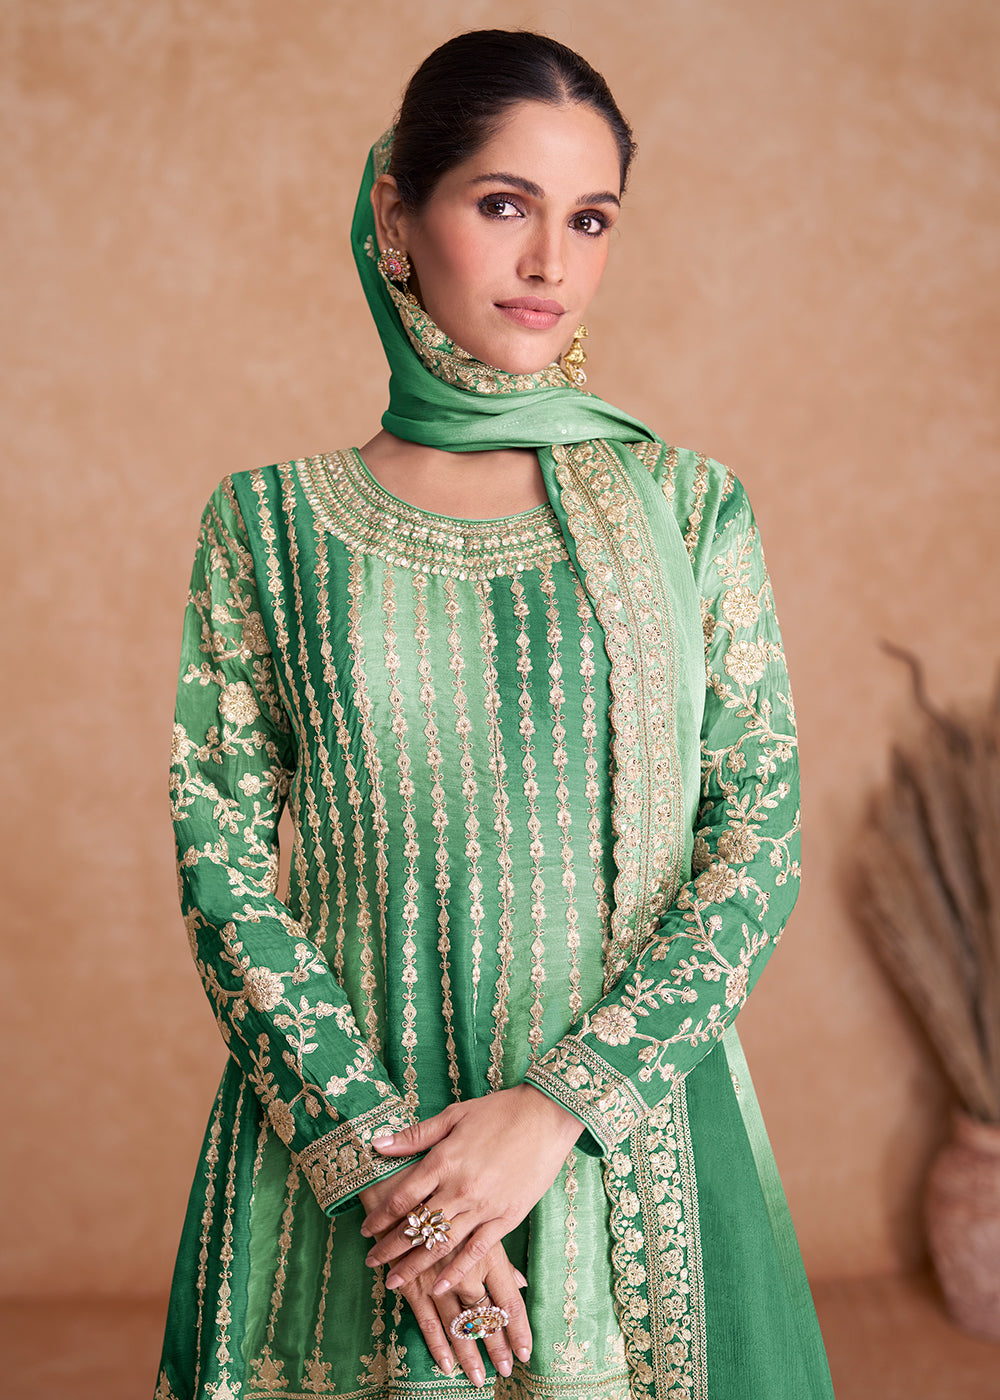 Shop Now Traditional Green Embroidered Wedding & Reception Wear Gharara Suit Online at Empress Clothing in USA, UK, Canada, Italy & Worldwide. 